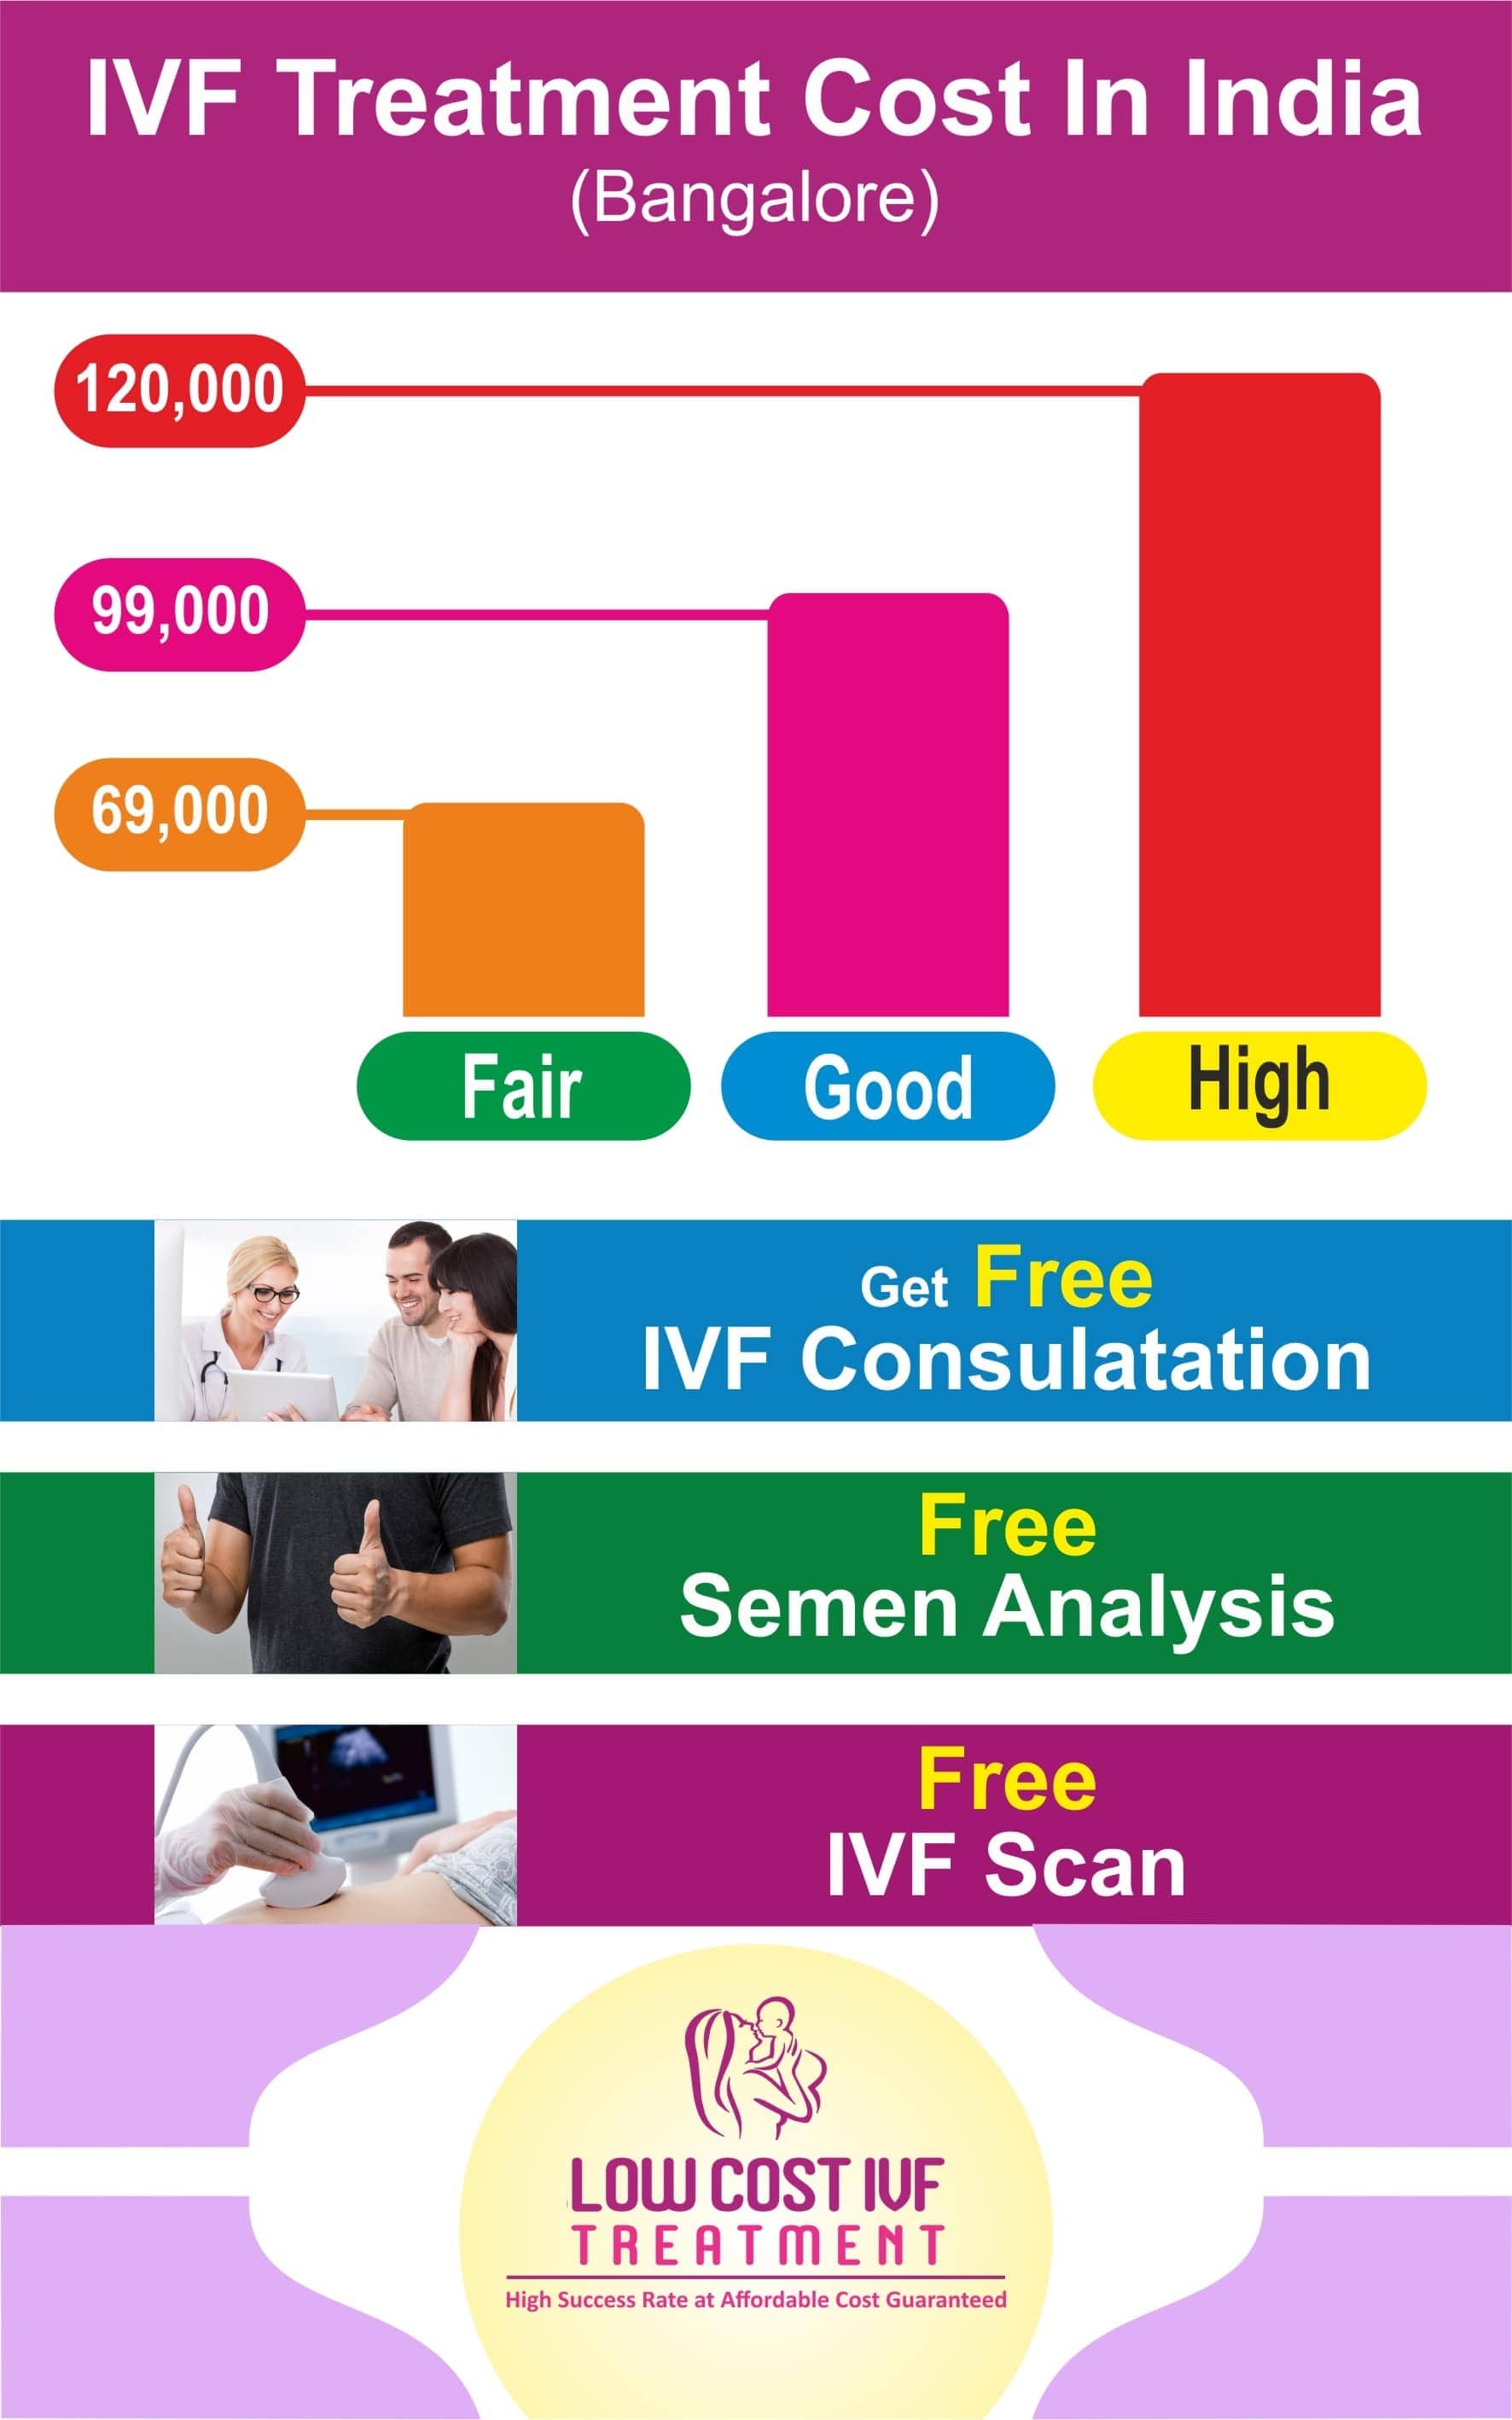 IVF Cost | What is the IVF Treatment Cost in India 2019? IVF Treatment in Bangalore